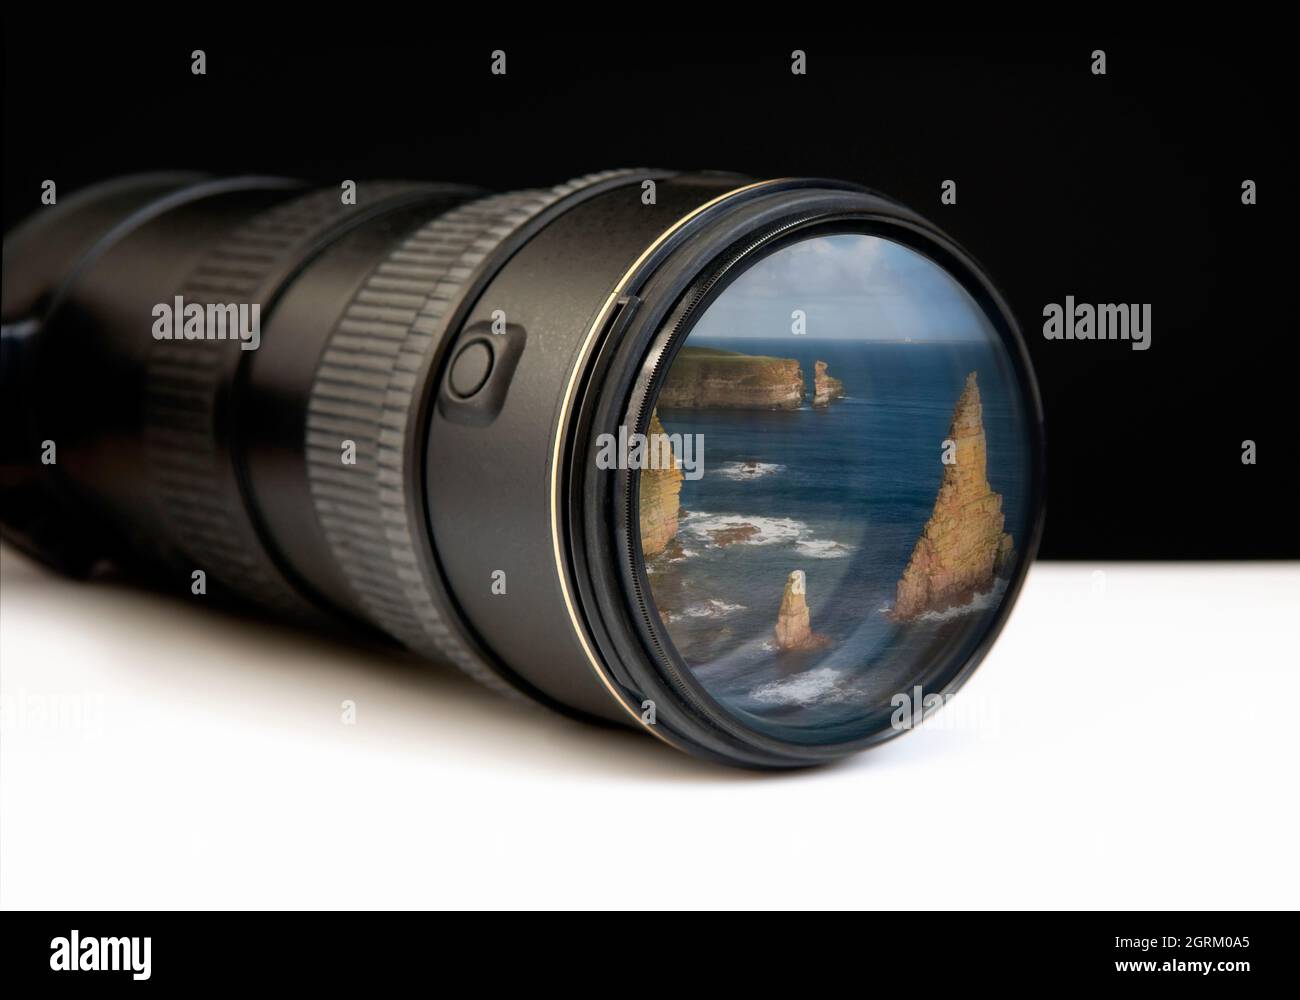 Digital zoom lens with landscape photo embedded on end, depicting concepts of the bigger picture, I spy, observation or the way forward Stock Photo